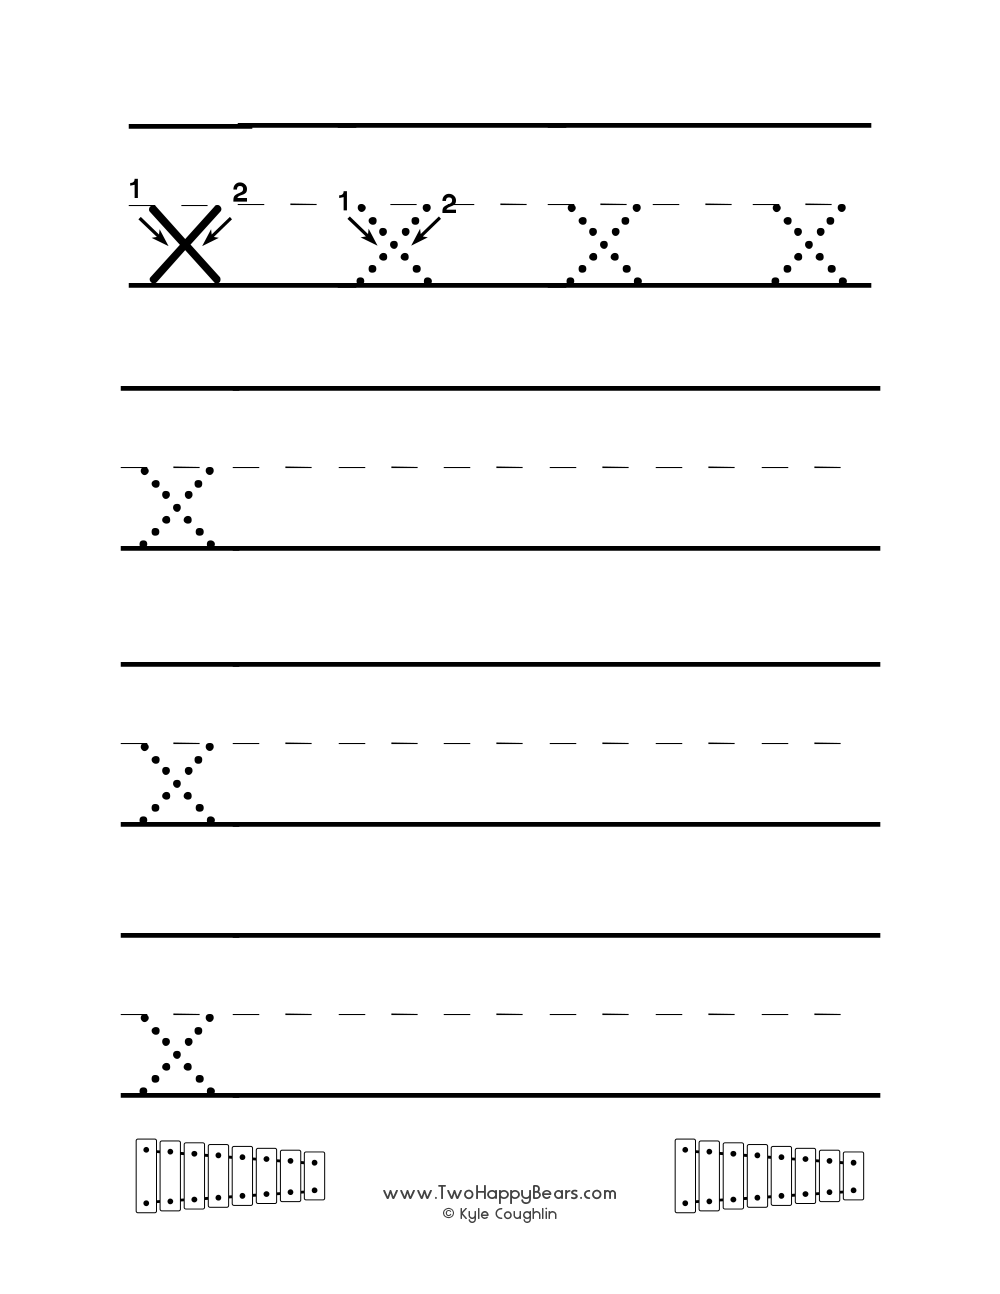 Lowercase letter X worksheet for tracing and drawing